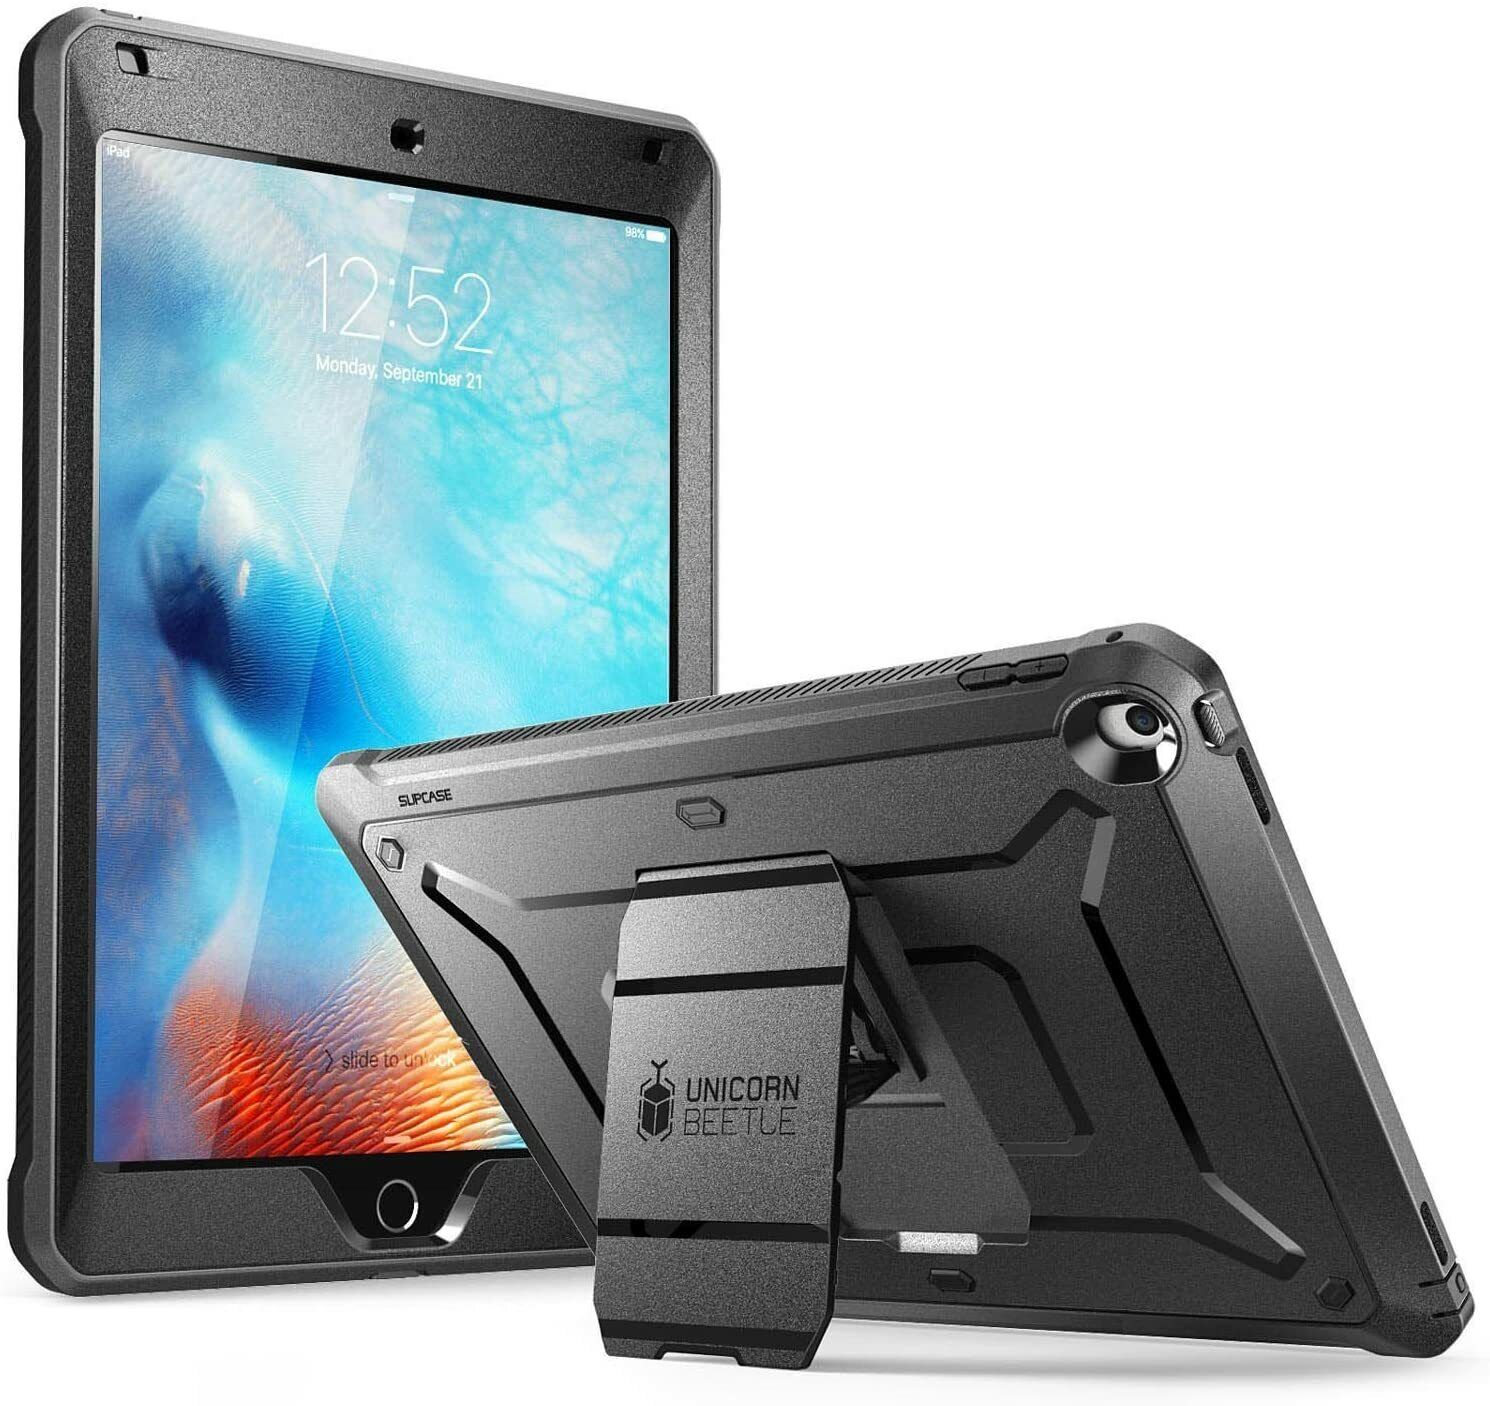 SUPCASE Rugged Stand Case For iPad 9.7